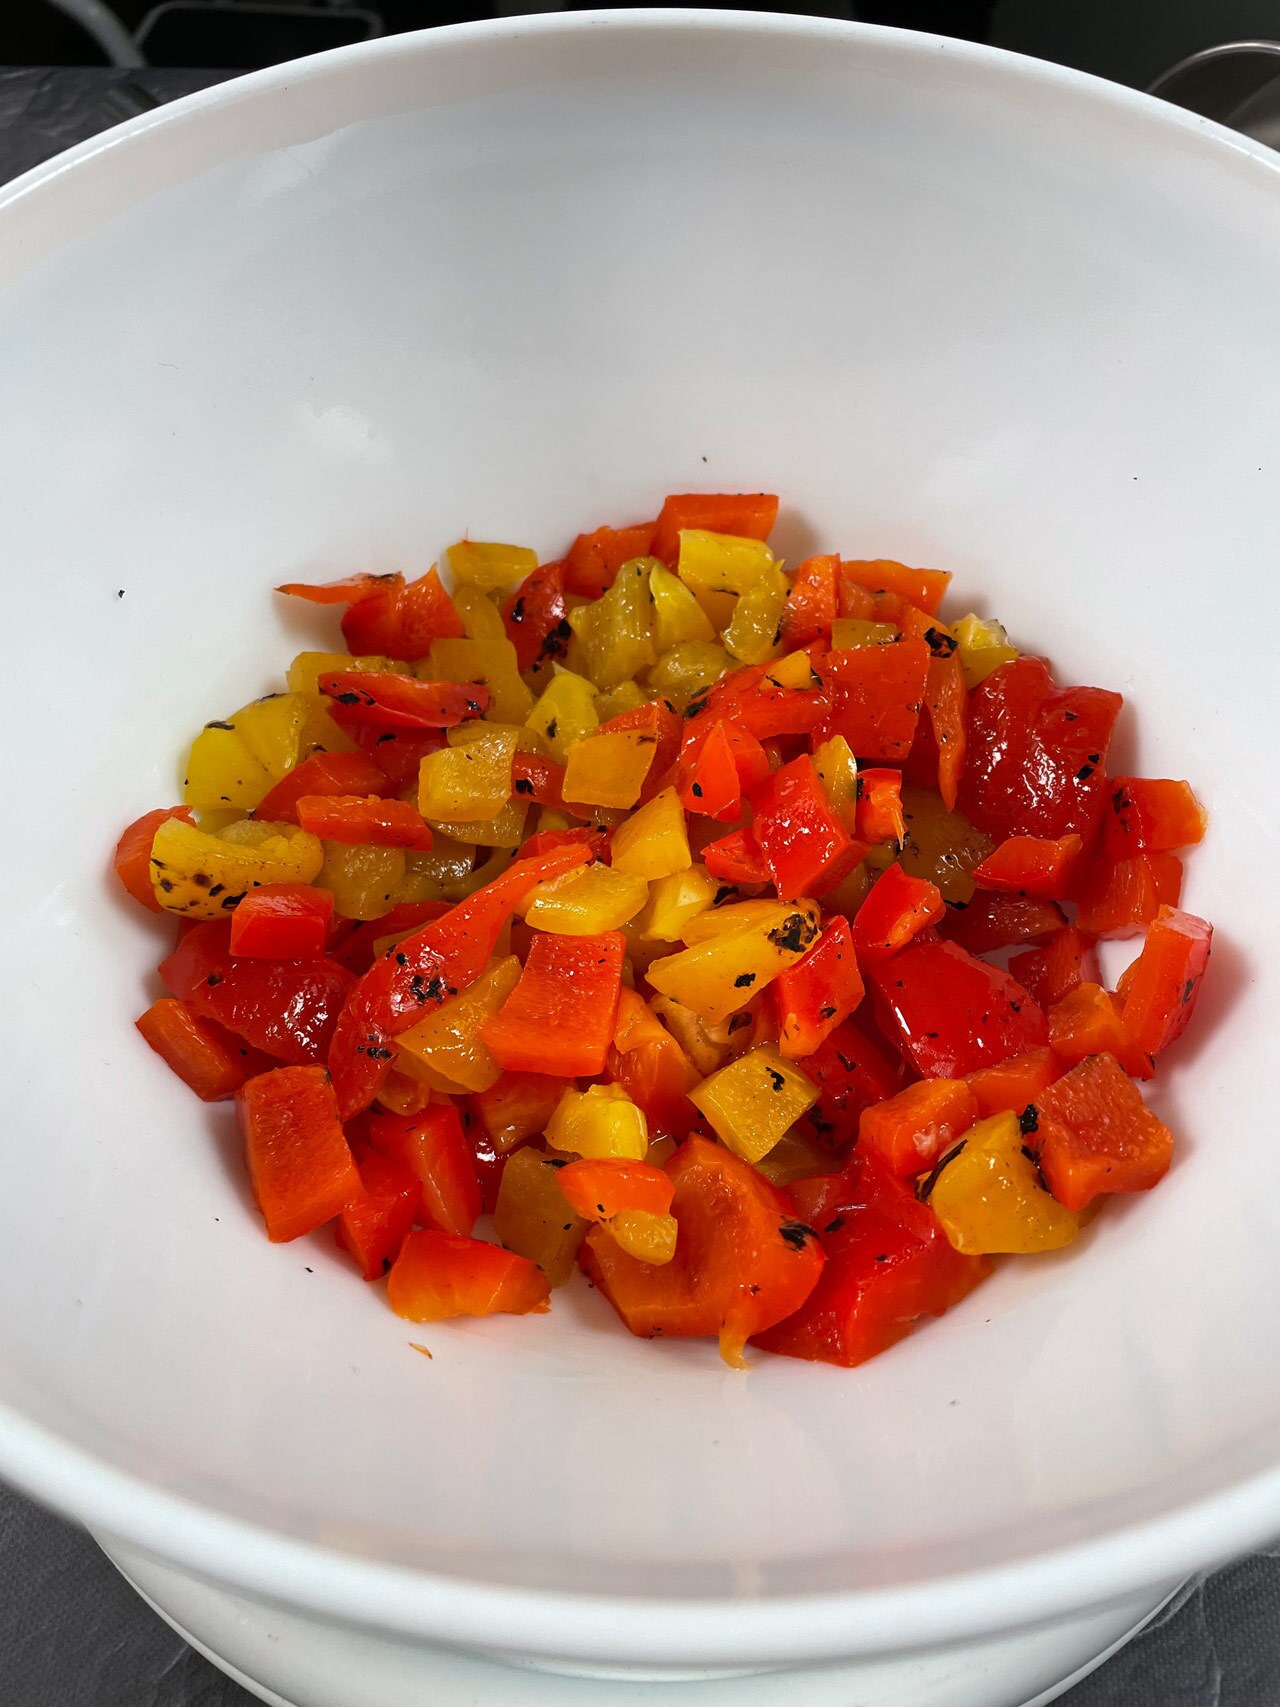 Chopped peppers for Star Wars-themed pog soup recipe.